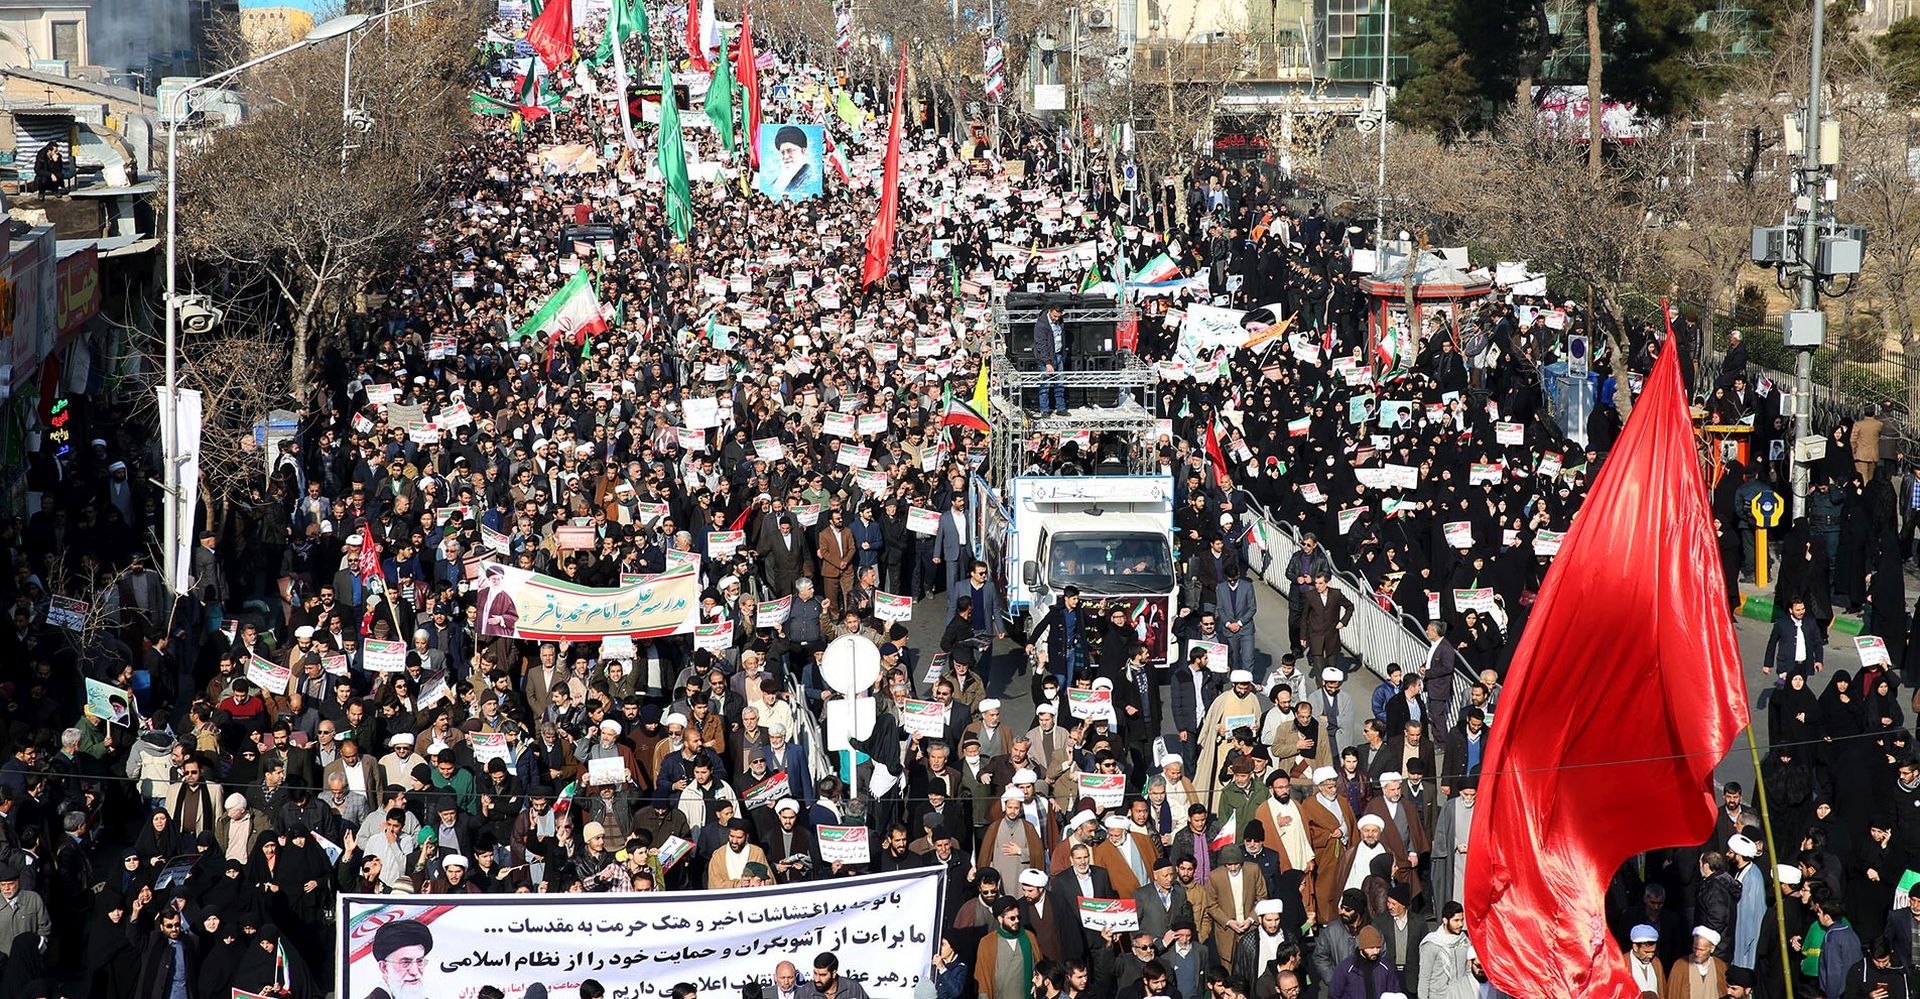 epa06416211 Iranians take part in a state organized rally against anti-government protests, in the city of Mashhad, 04 January 2018. Media reported that after several days of ongoing anti-regime protests in Iran, the country's Islamic leadership has now organized rallies nationwide. Hundreds of thousands took to the streets to demonstrate their support for the regime.  EPA/NIMA NAJAF ZADEH